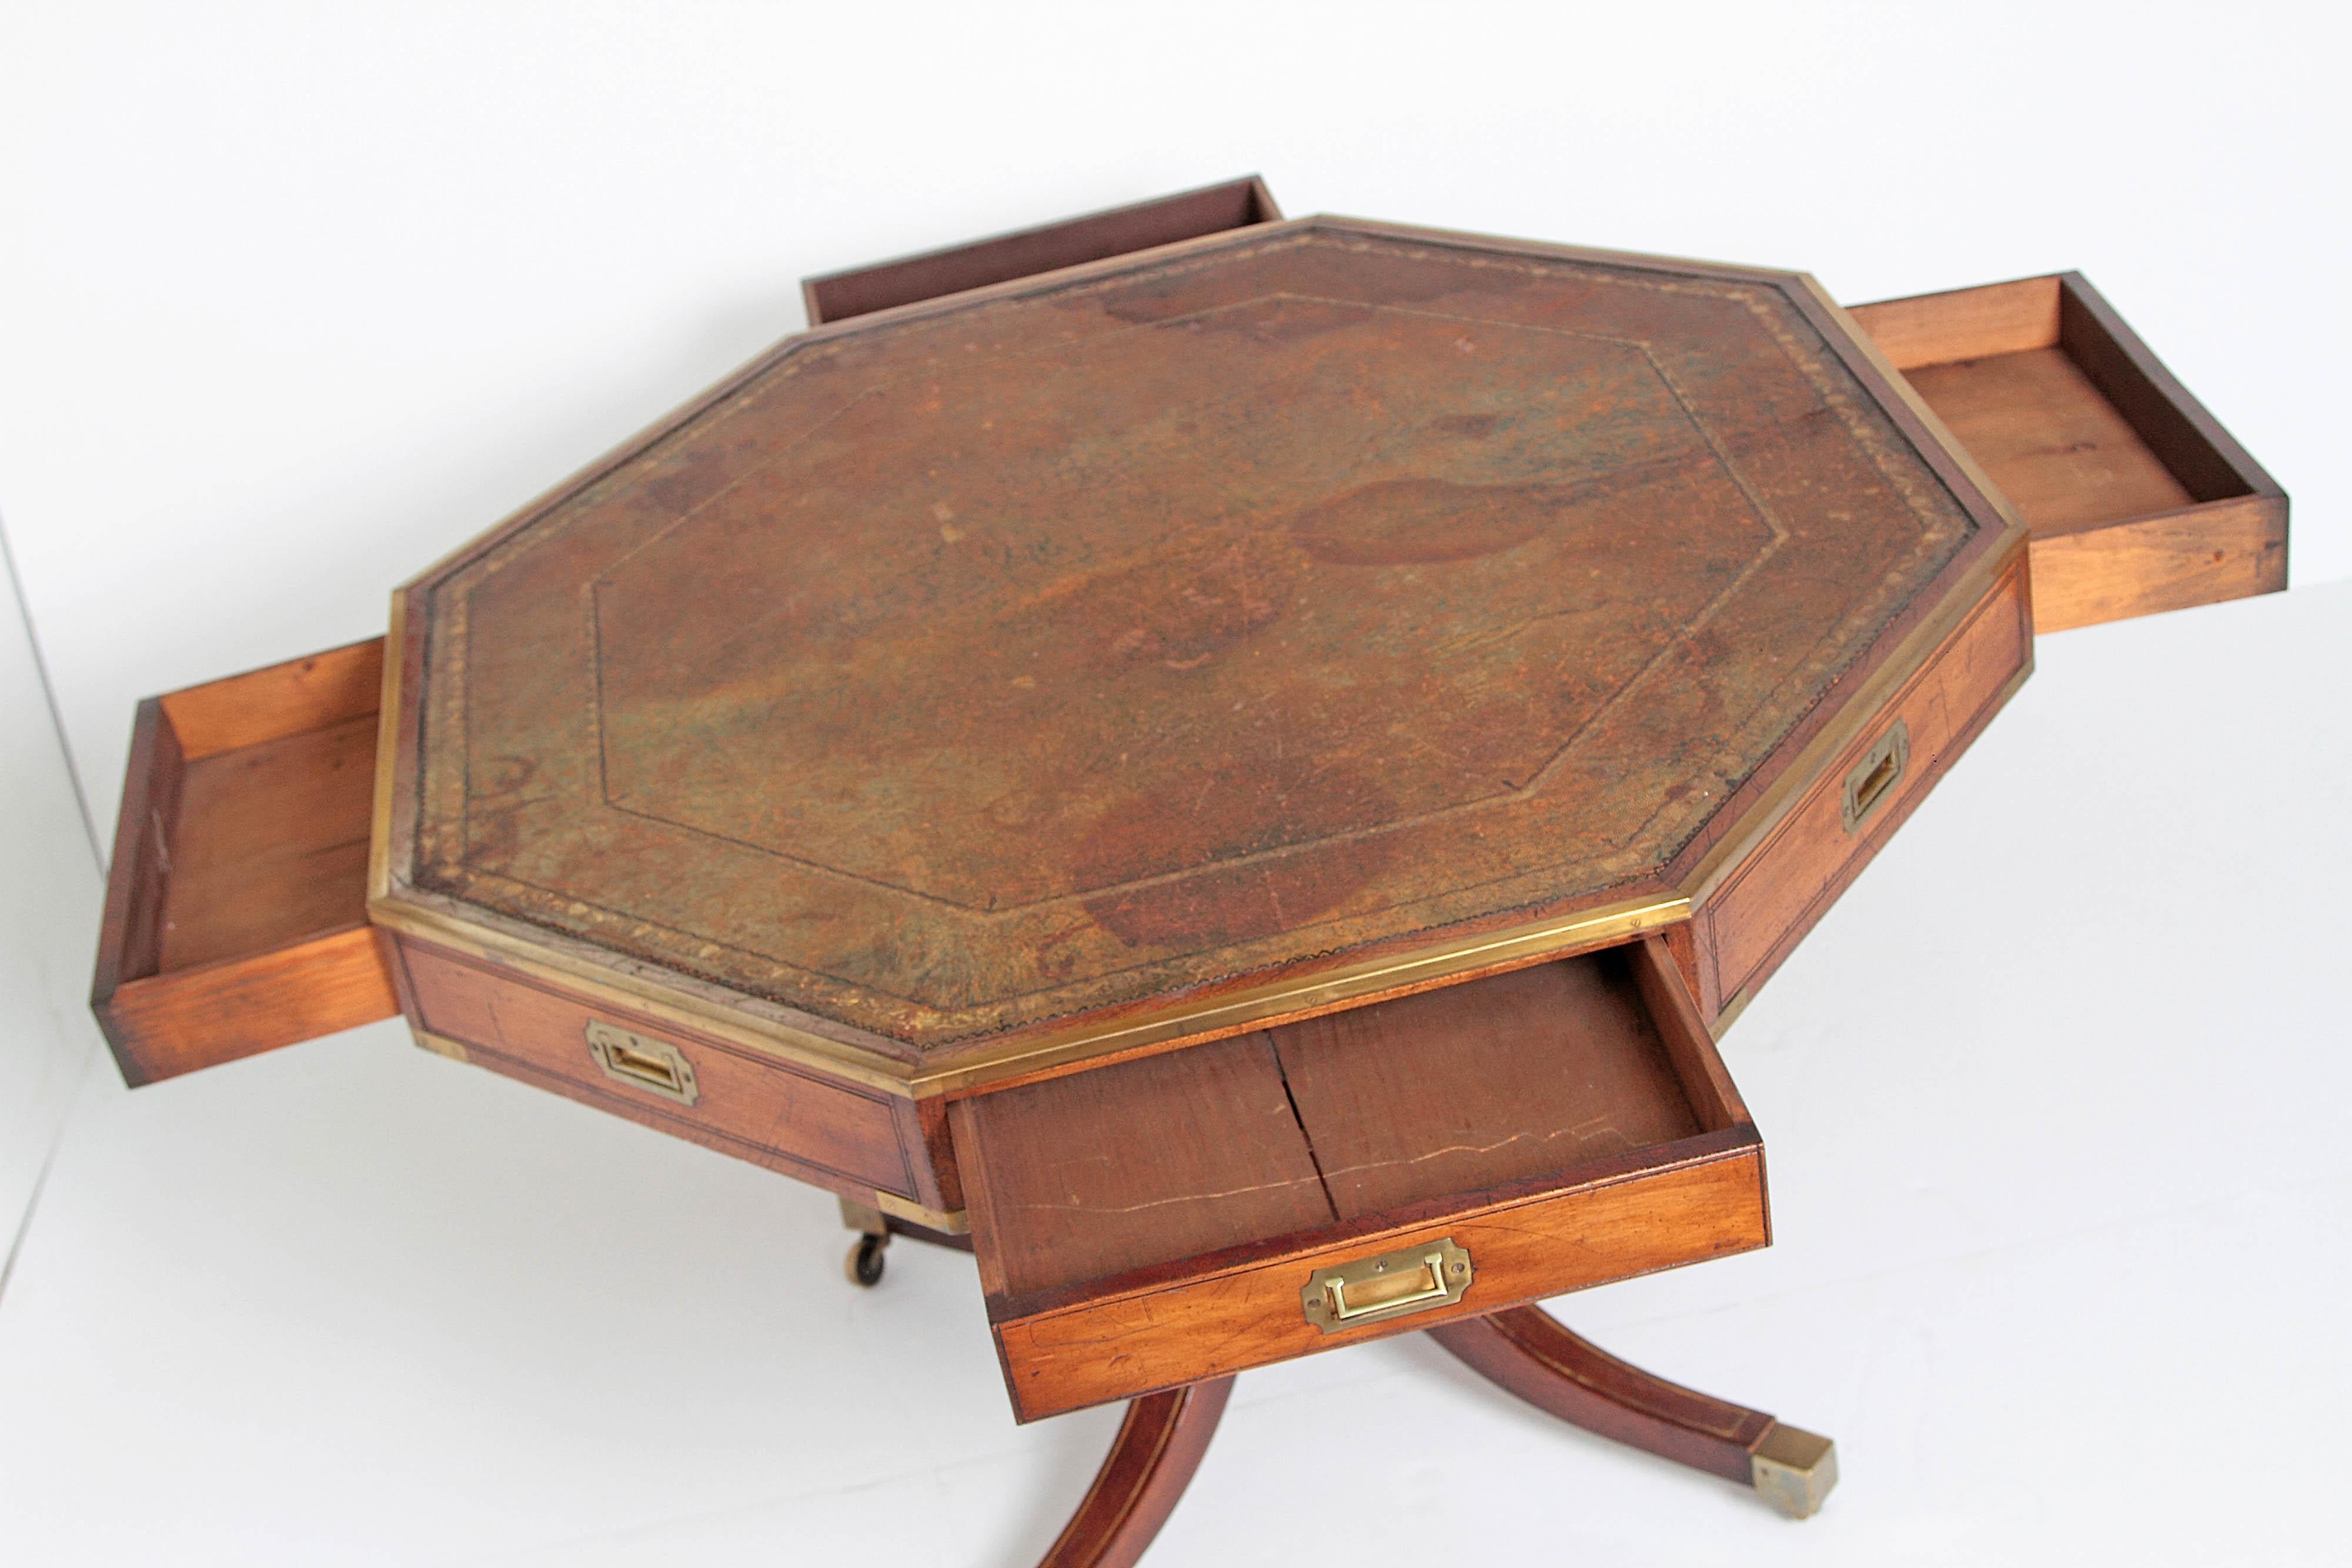 19th Century English Regency Drum Table with Brass Campaign-Style Hardware / Fittings